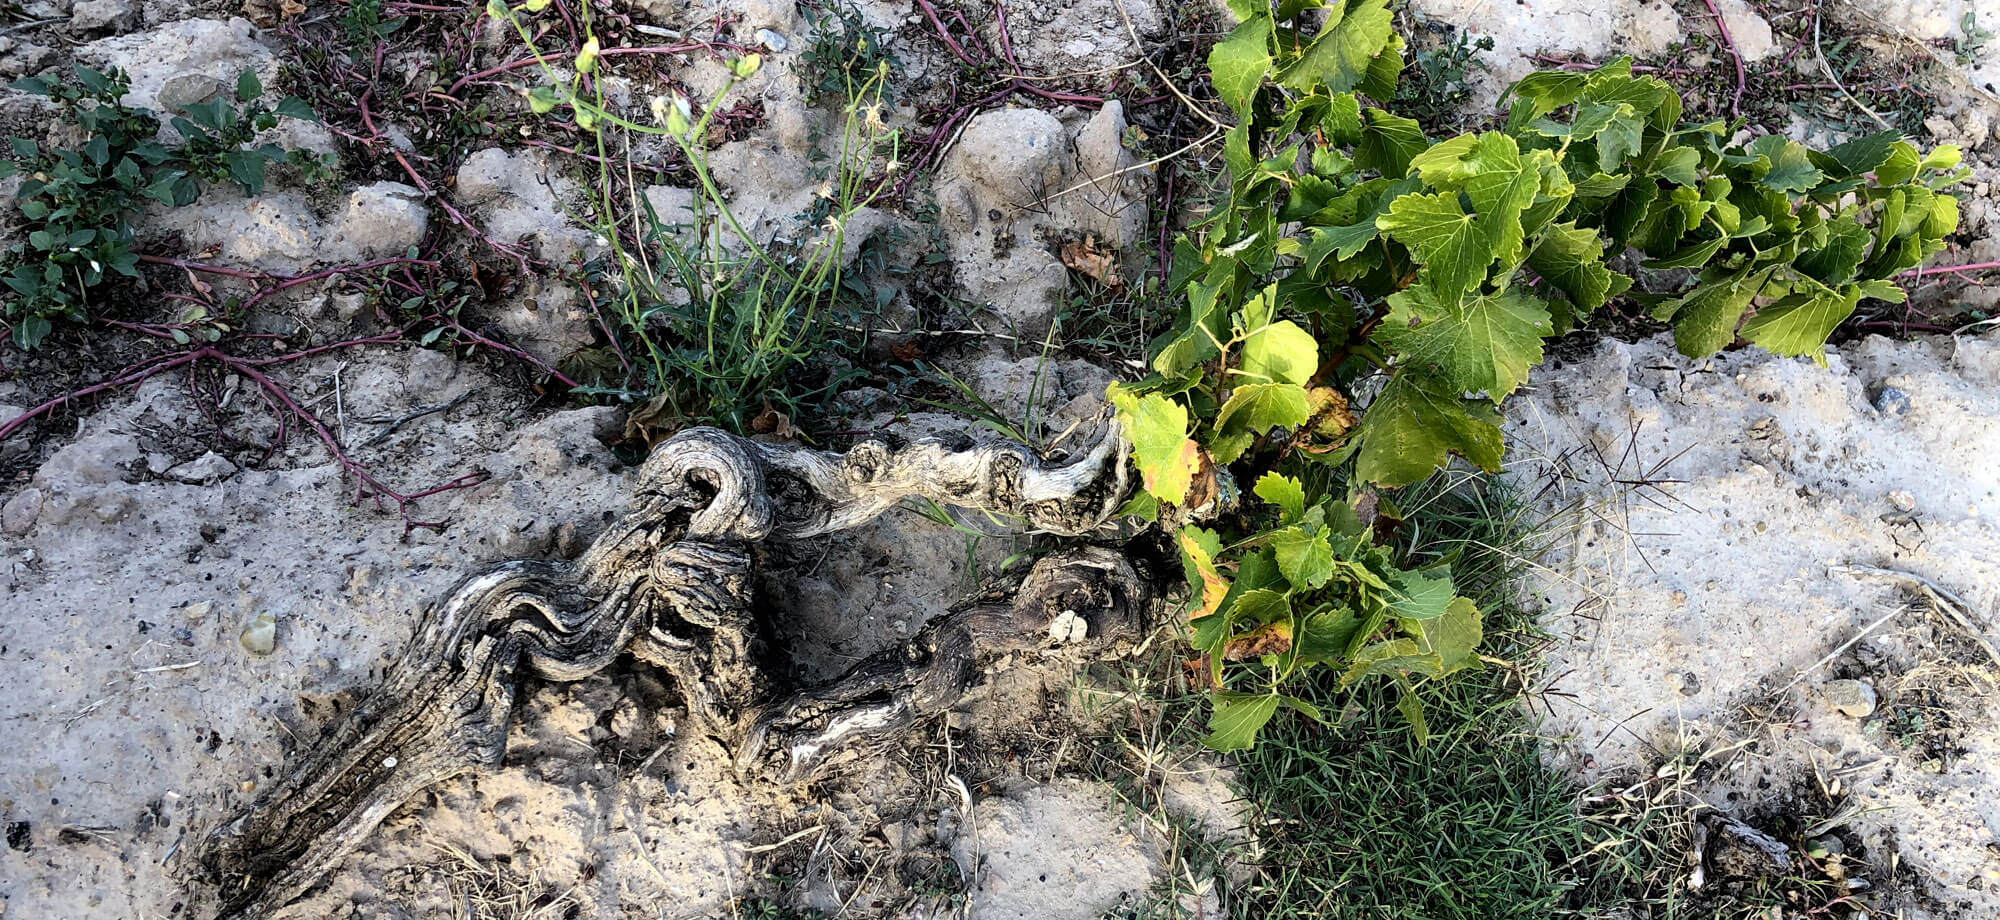 The poorest soils for the vineyard 